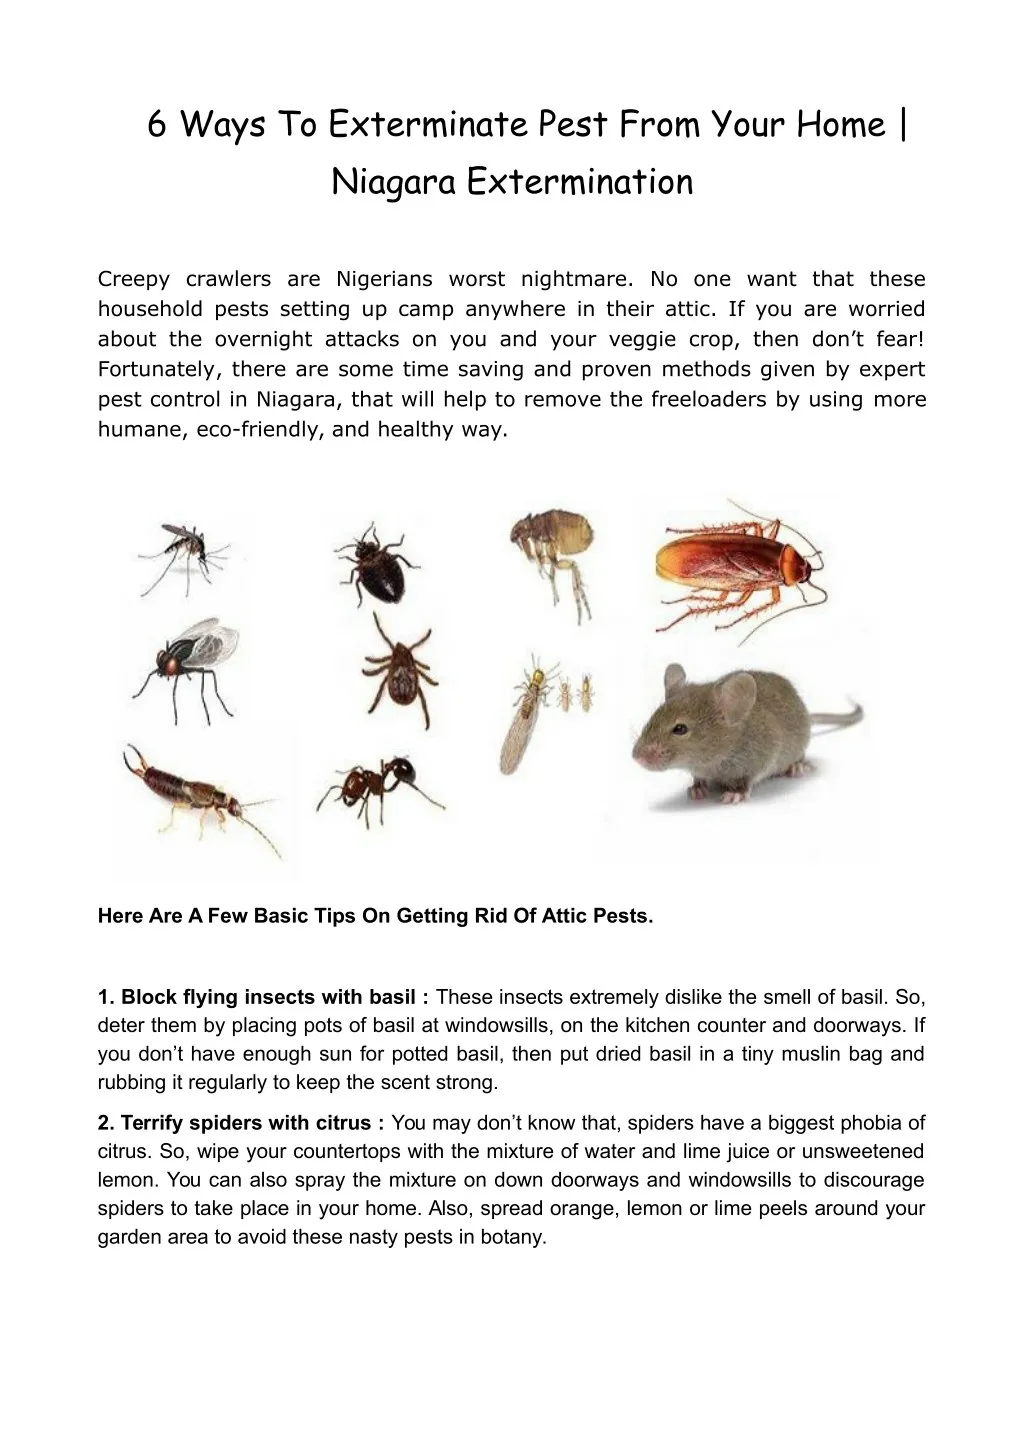 6 ways to exterminate pest from your home niagara